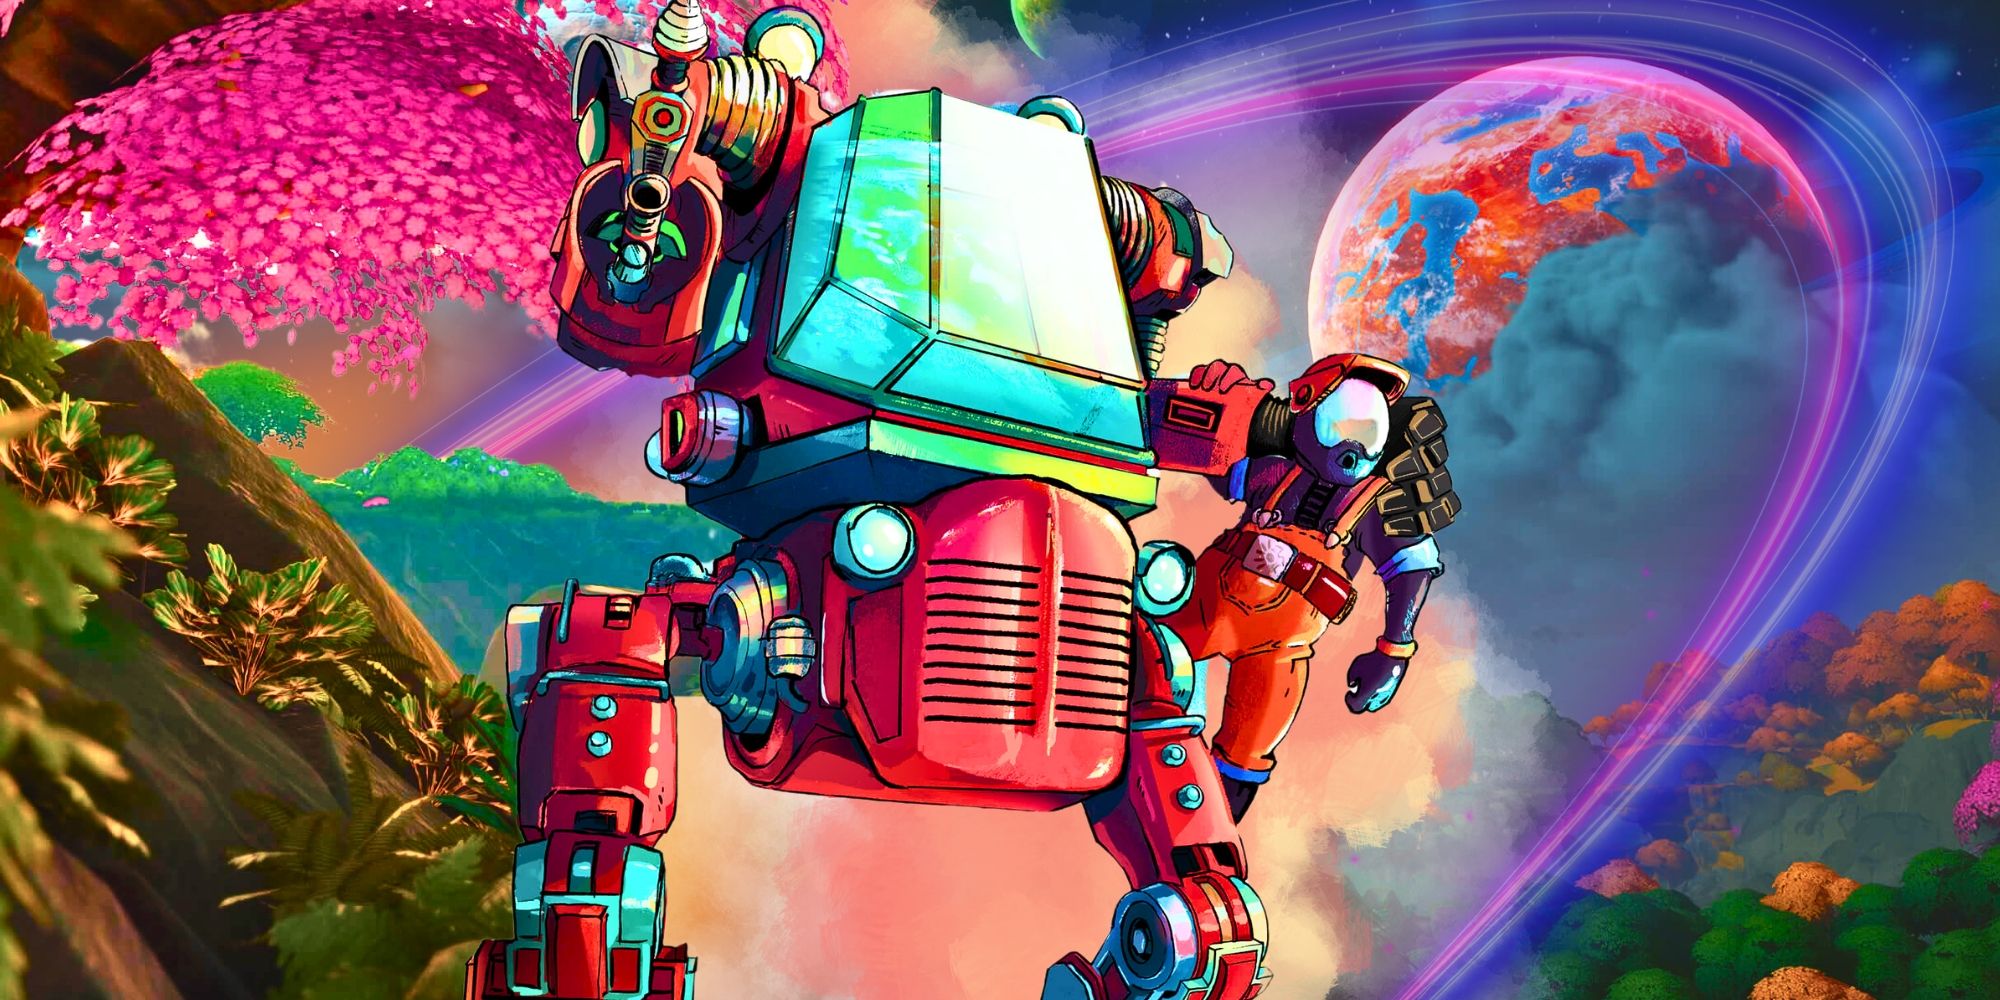 mech-pilot-in-red-spacesuit-standing-on-the-side-of-a-red-farming-mech-against-an-alien-planet-background-in-lightyear-frontier.jpg